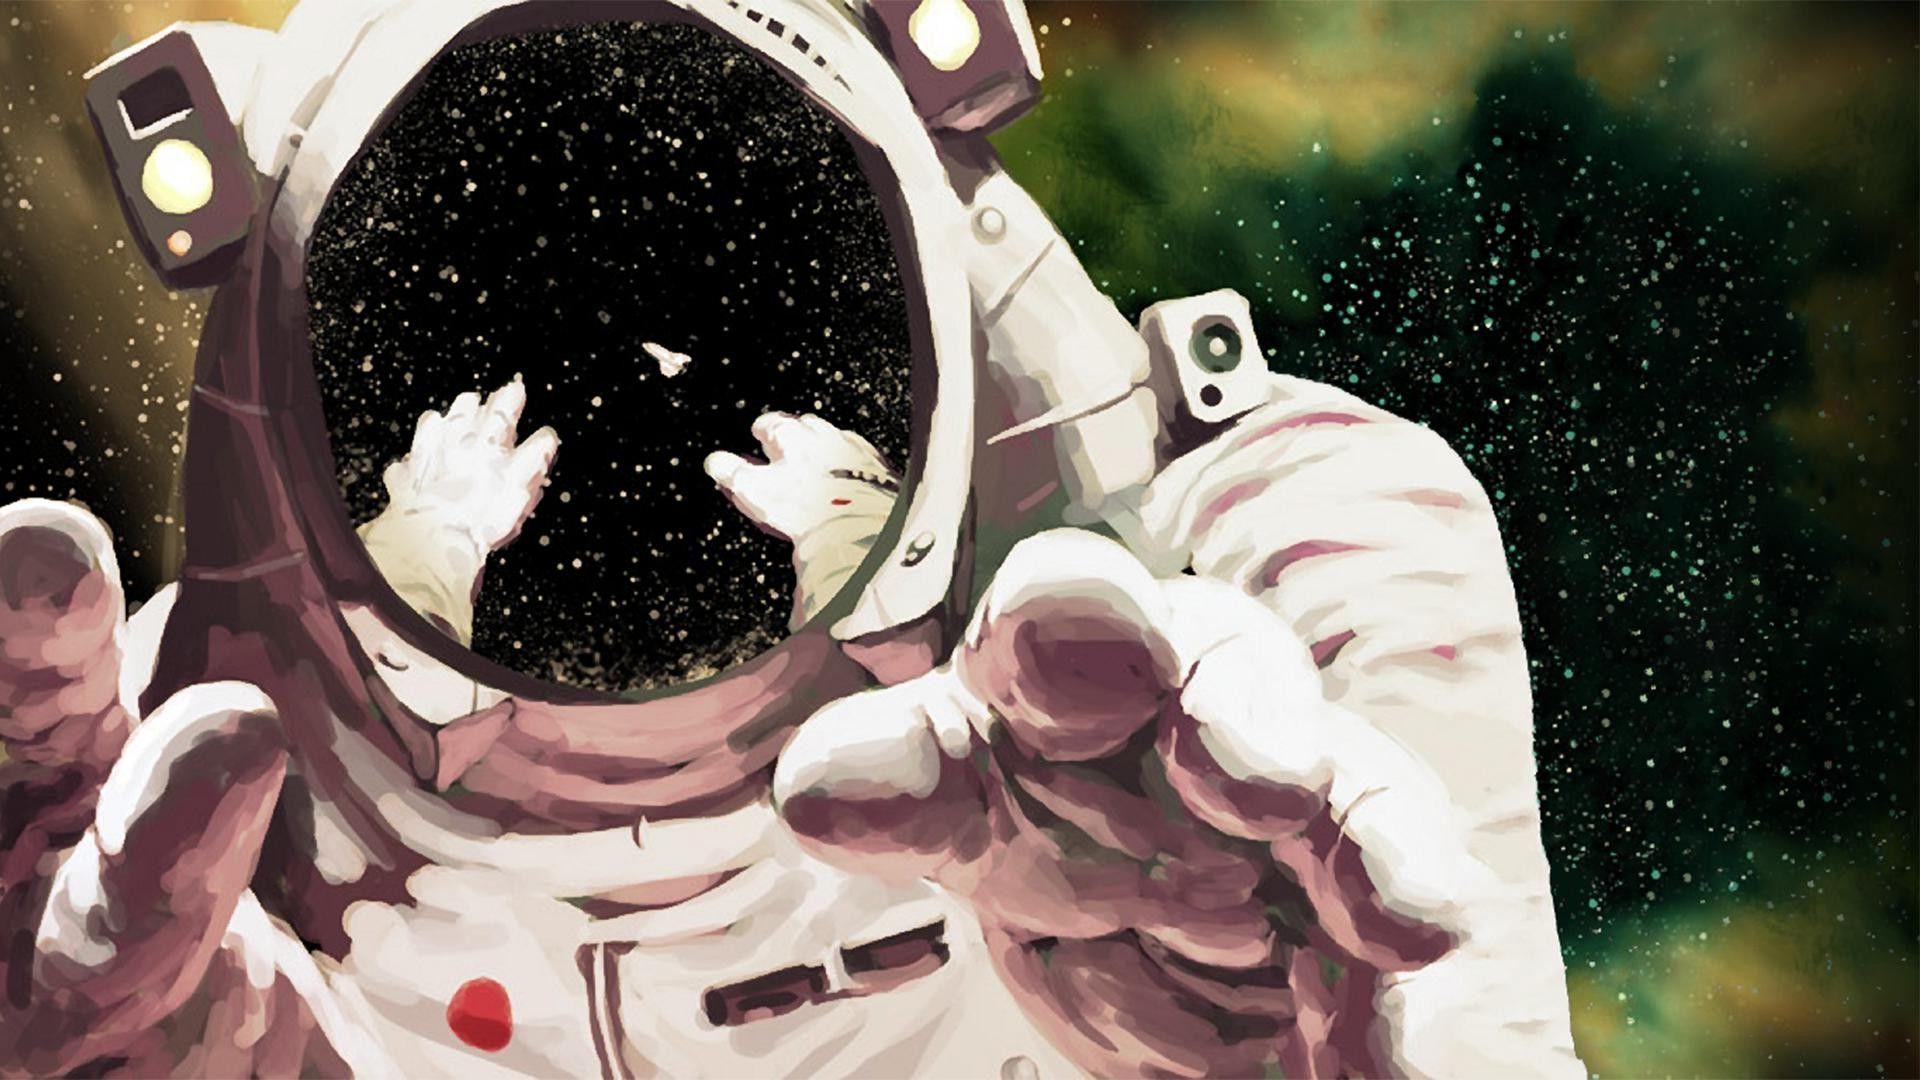 anxiety, Space, Astronaut, Lost, Space Shuttle, Sad Wallpaper HD